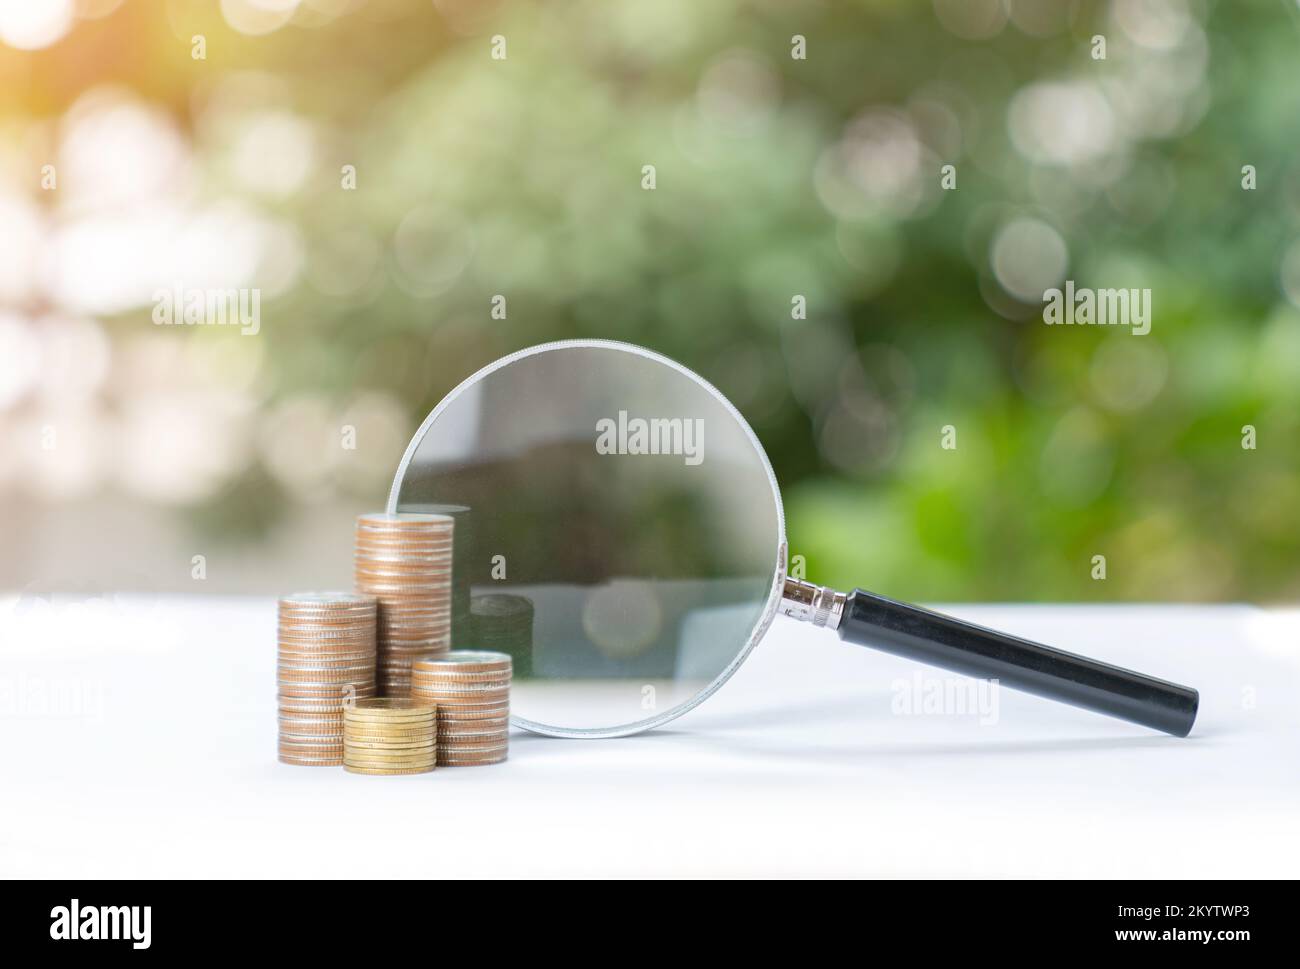 Magnifying glass on the stack of coins on out of focus green tree